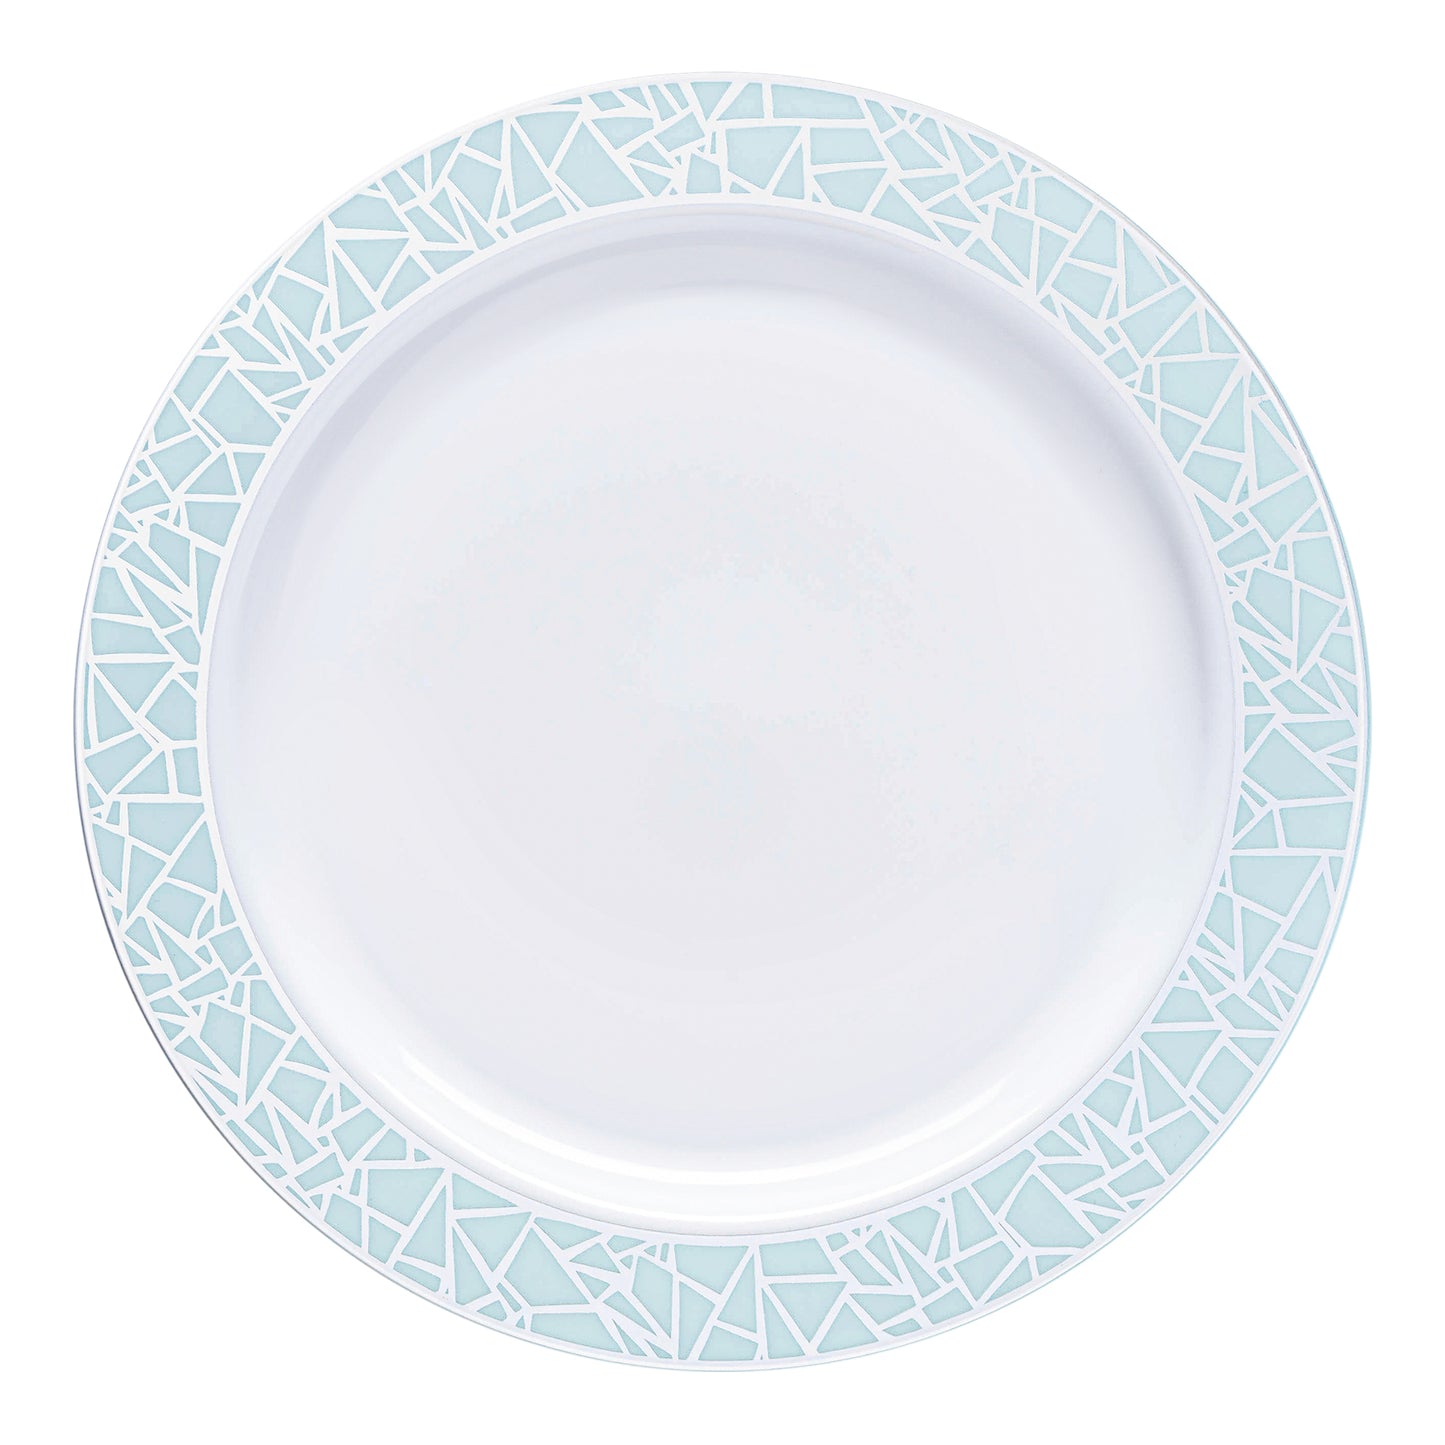 White with Turquoise Blue and Silver Mosaic Rim Round Plastic Dinner Plates (10.25") | The Kaya Collection